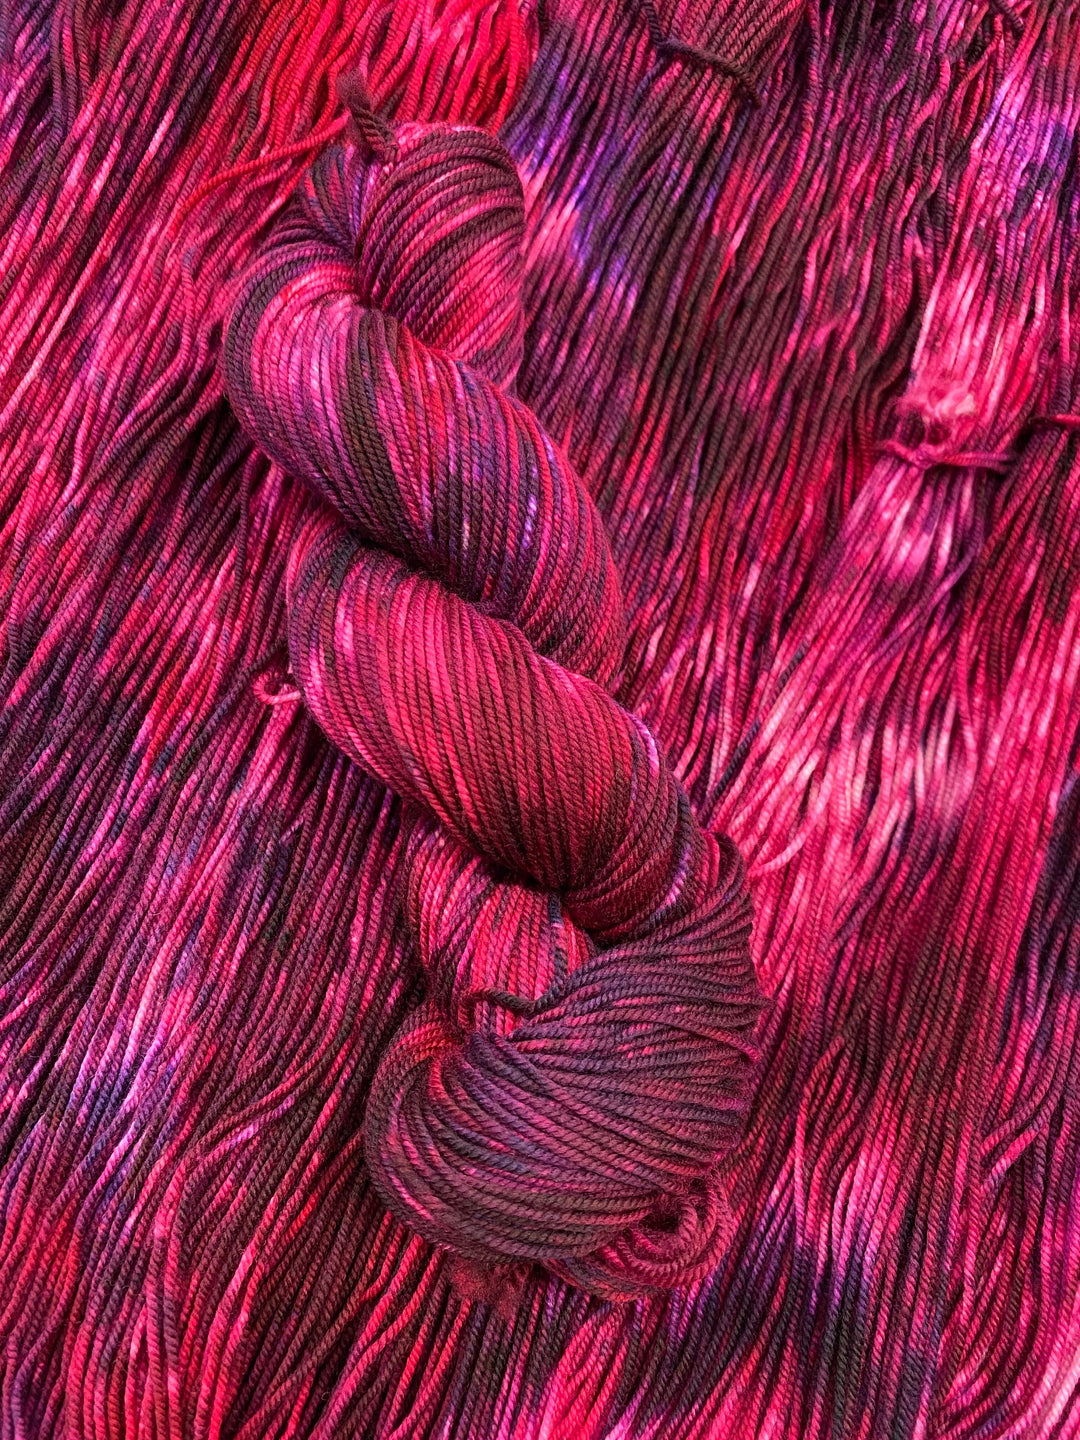 We Can Jam That- Hand dyed yarn - Mohair - Fingering - Sock - DK - Sport - Worsted - Bulky - Variegated yarn